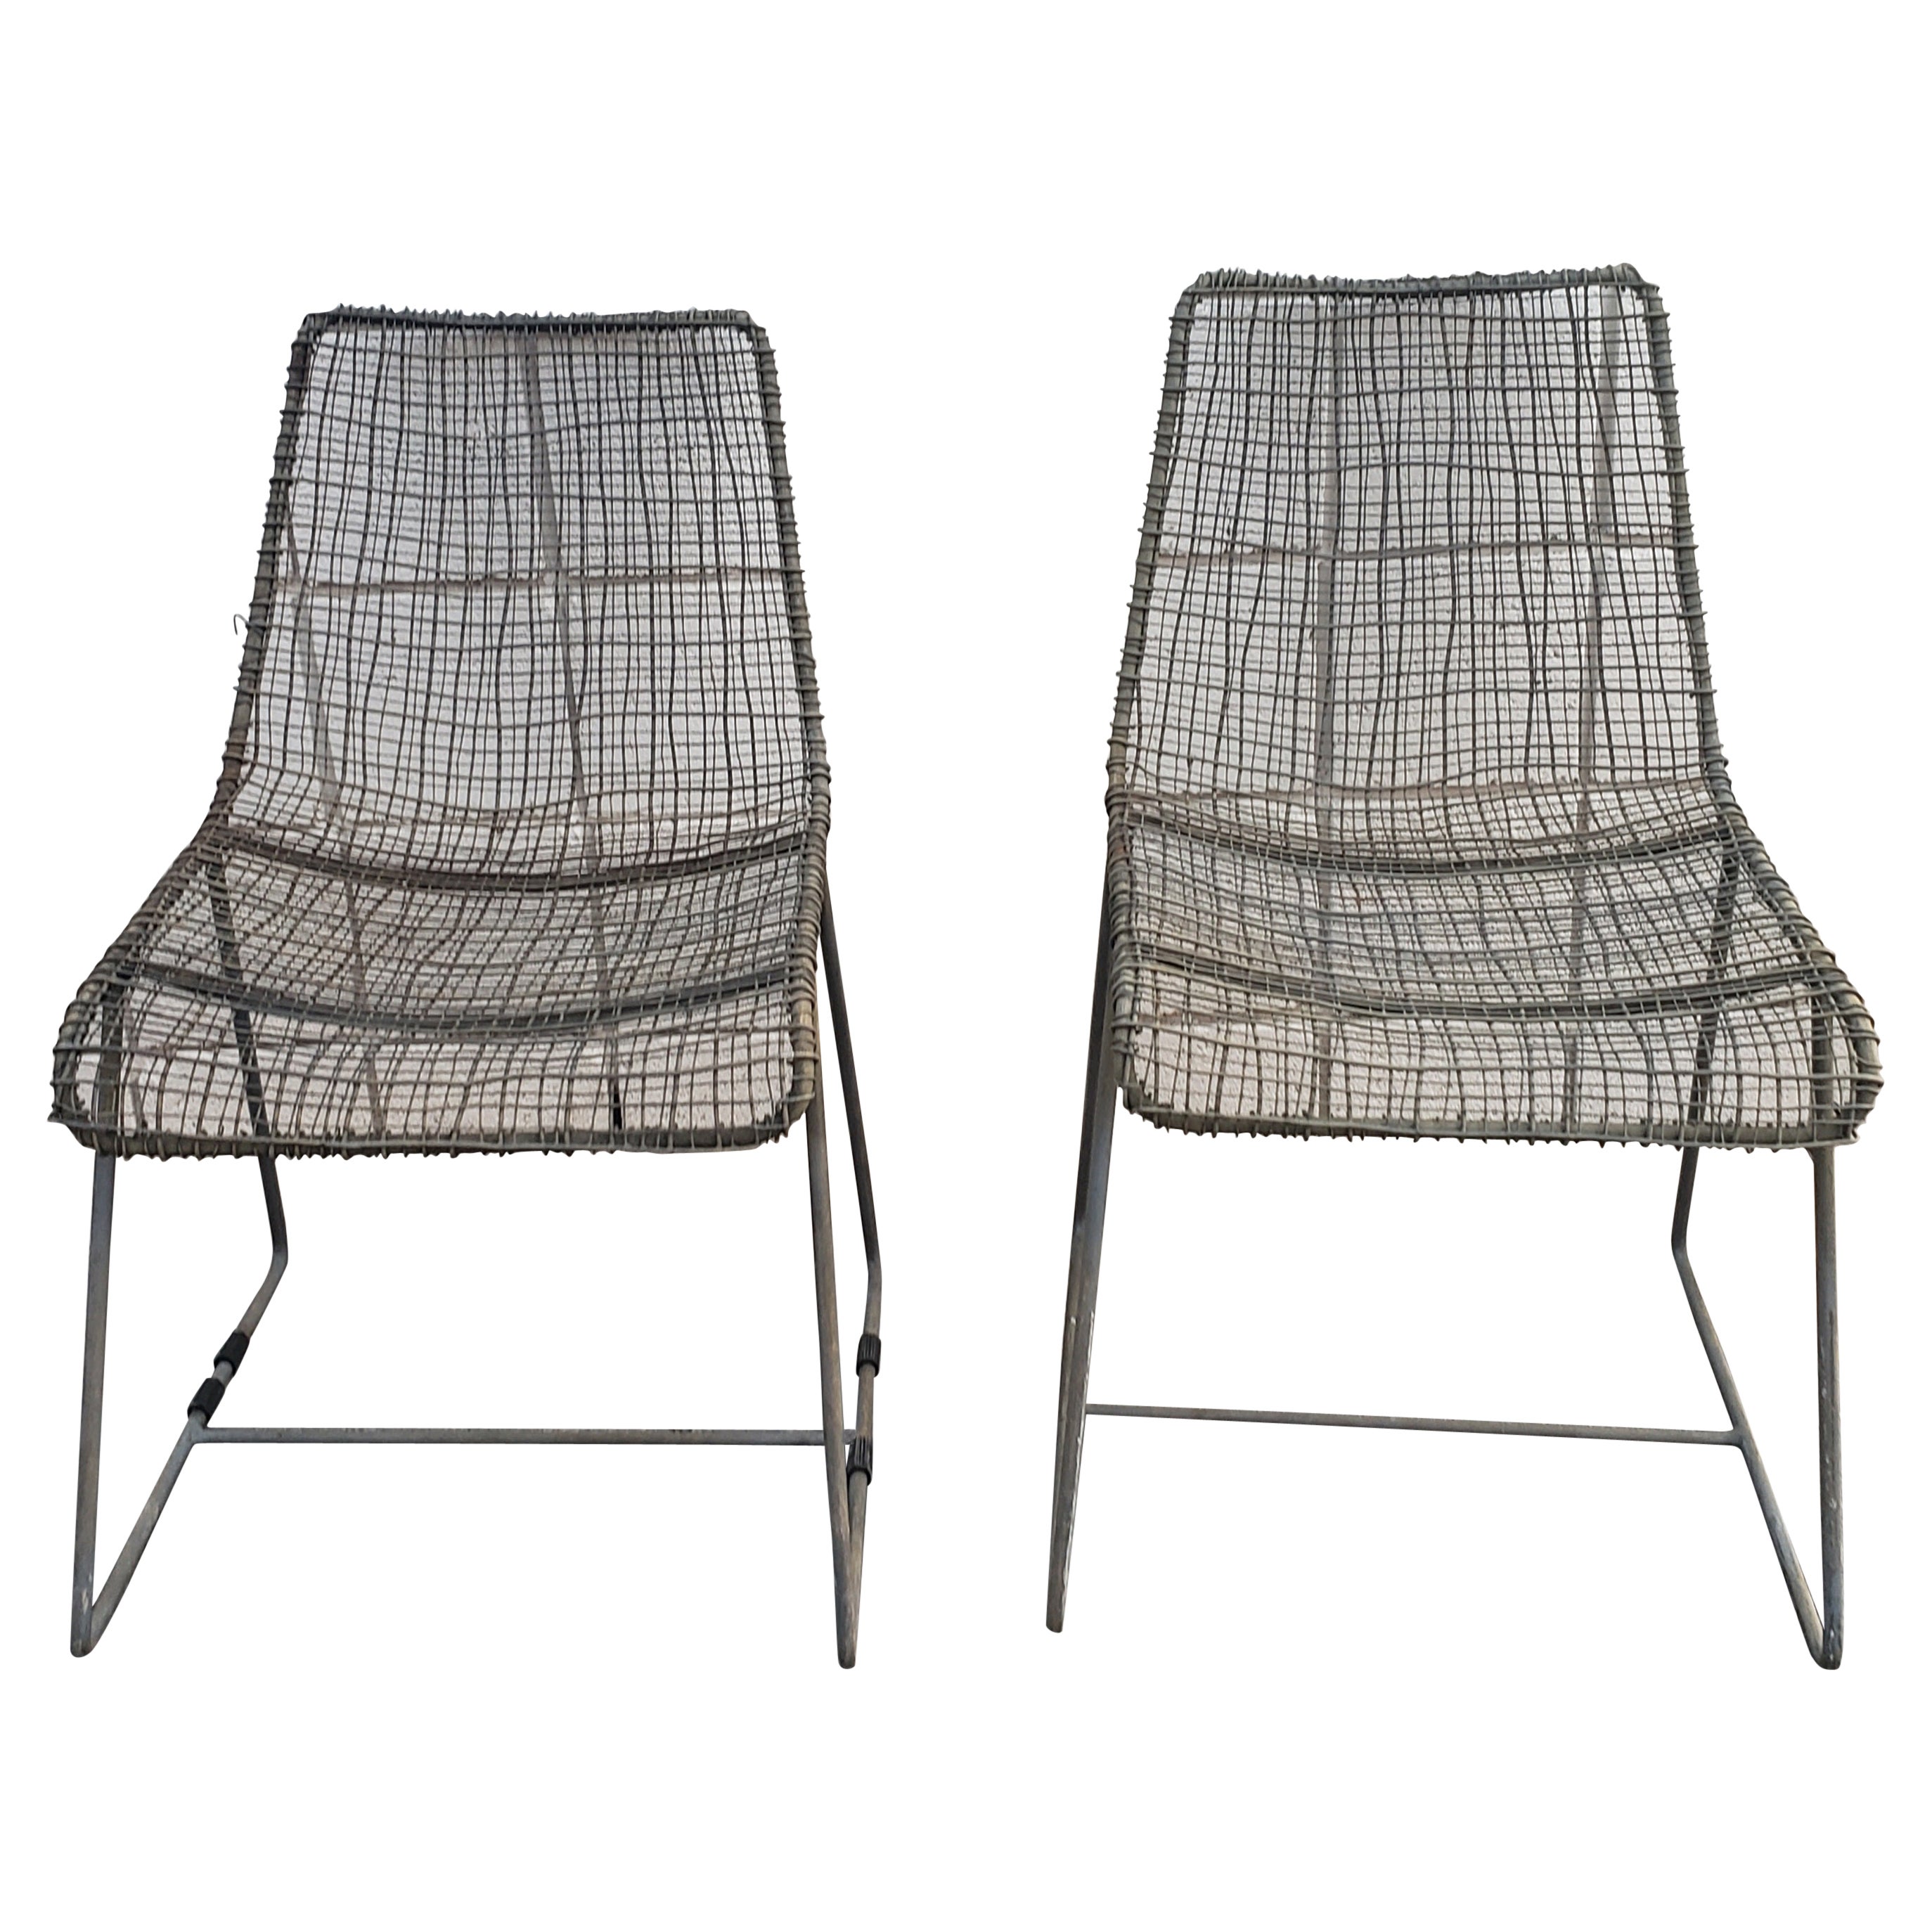 1970s Slope Wrought Iron and Steel Mesh Lounge Chairs, a Pair